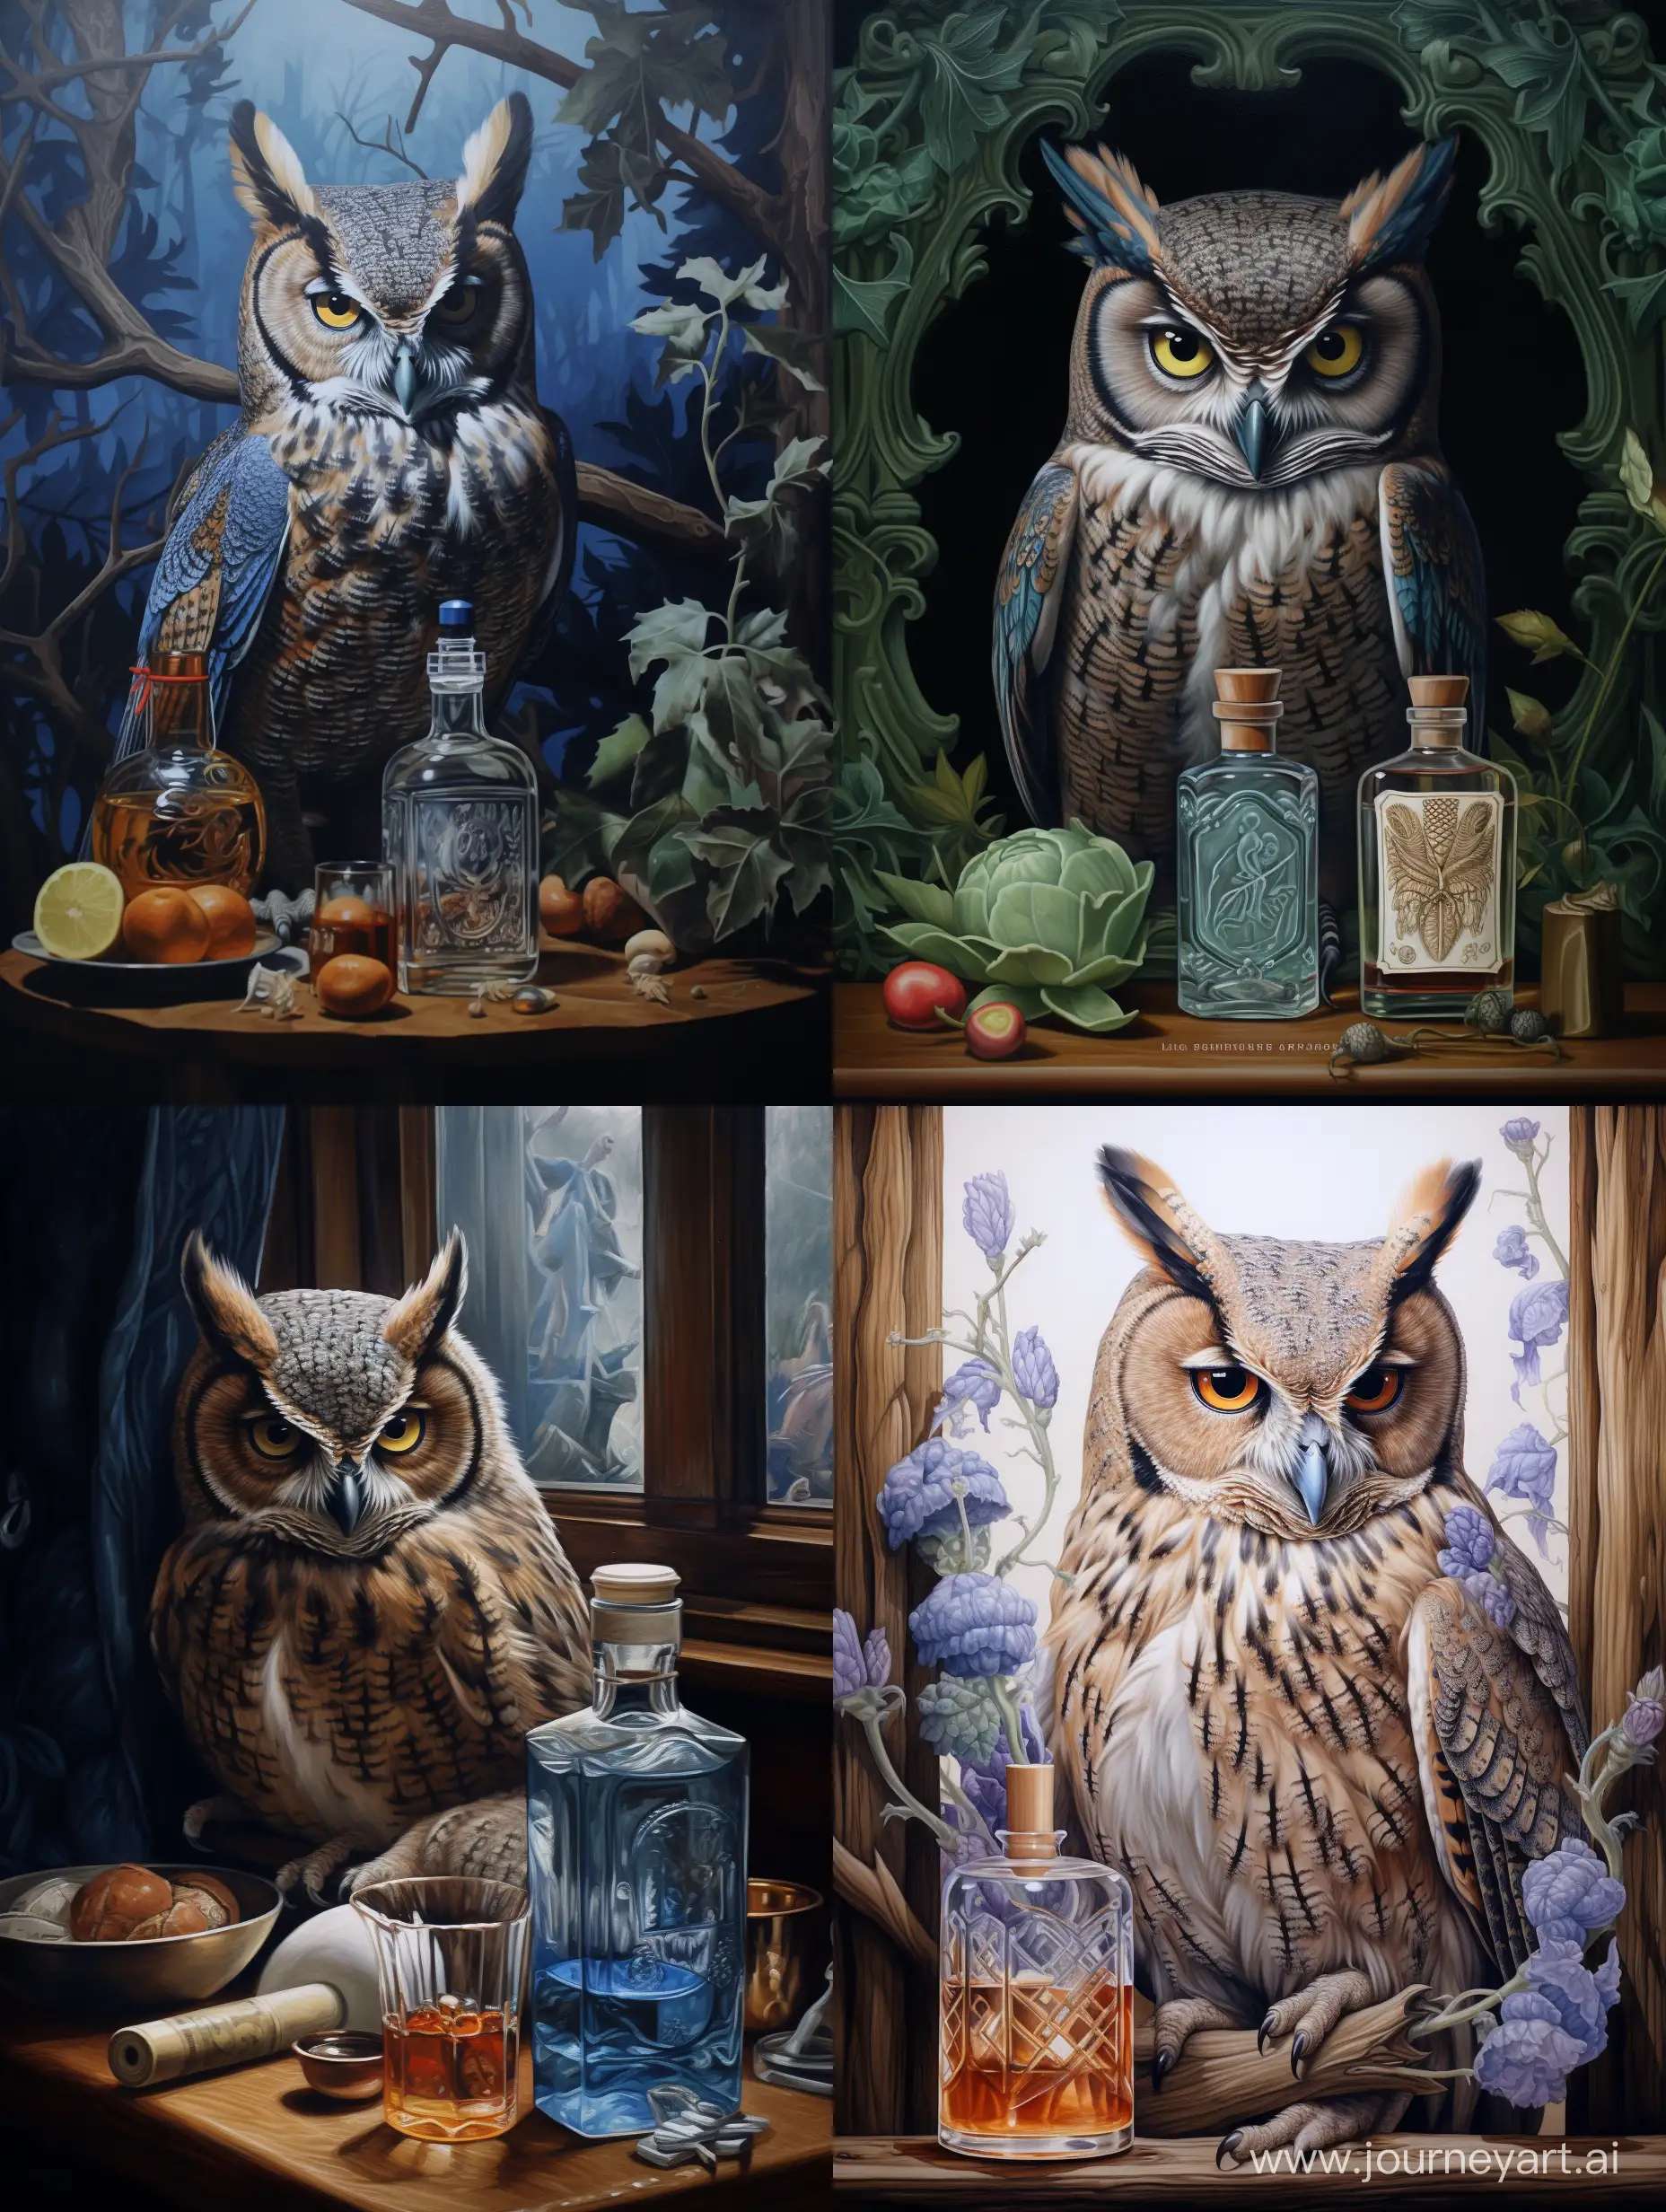 Enigmatic-Owl-Receives-Mysterious-Invitation-beside-Vodka-Bottle